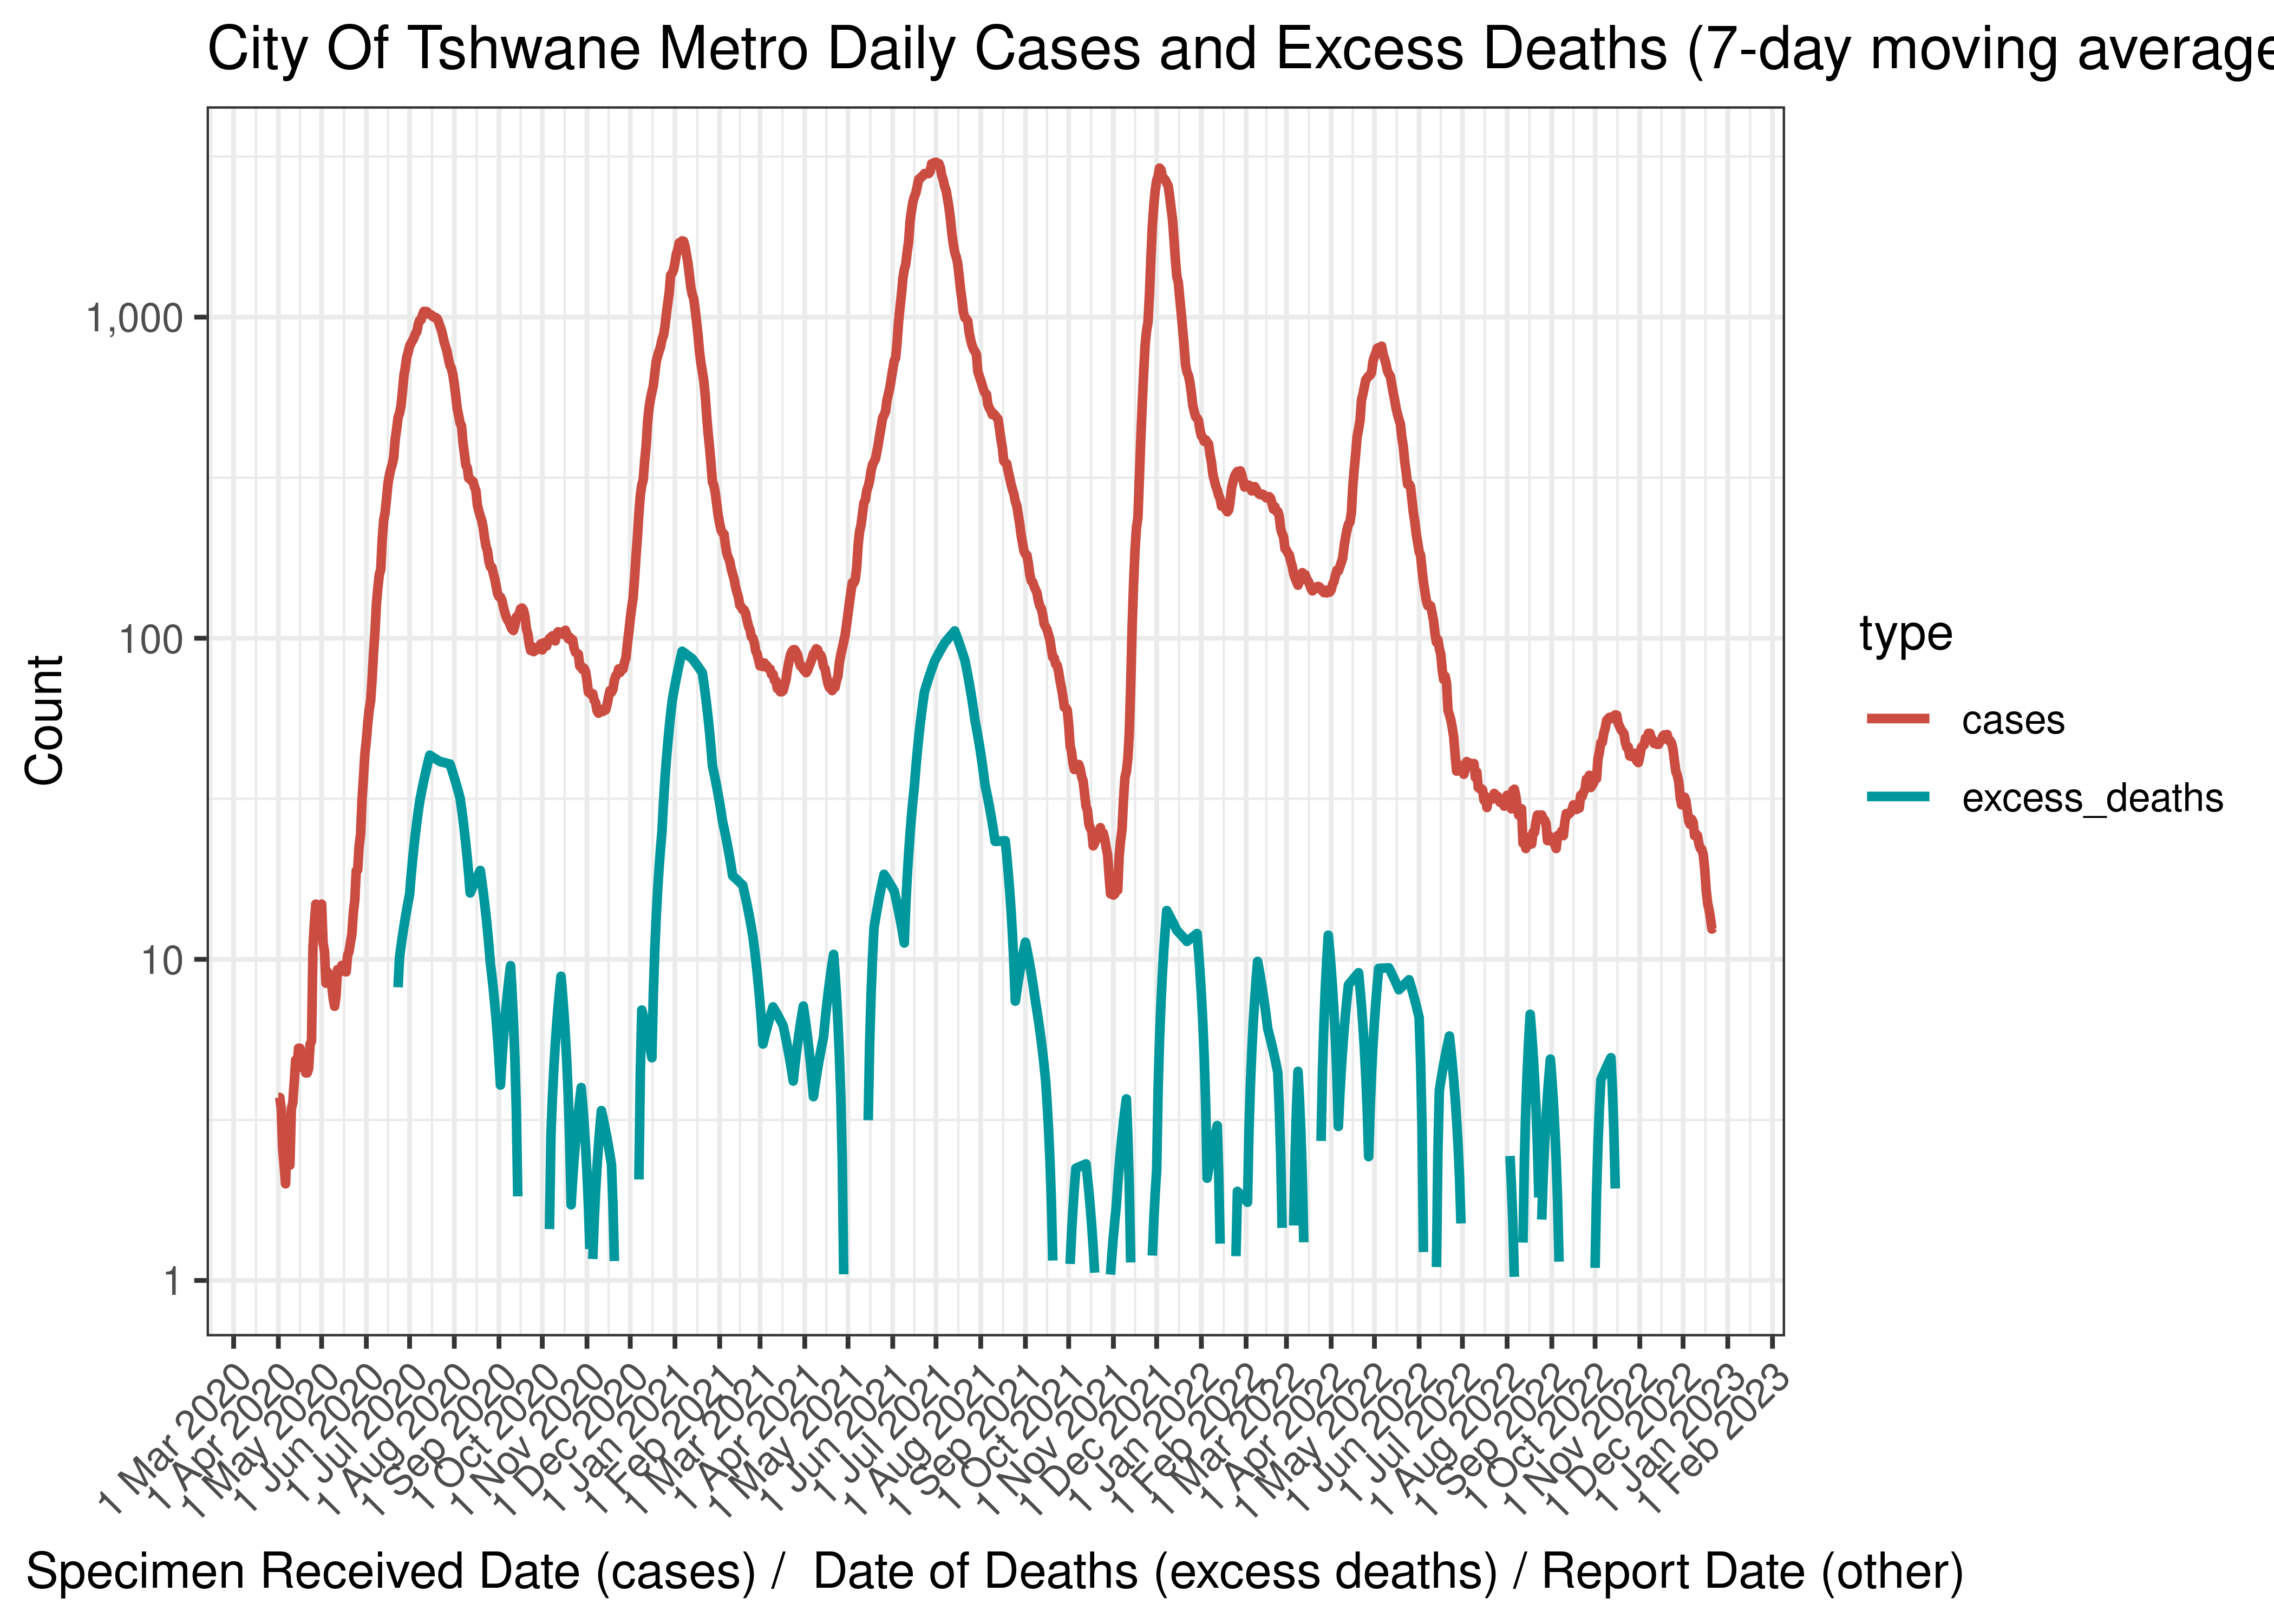 City Of Tshwane Metro Daily Cases and Excess Deaths (7-day moving average)